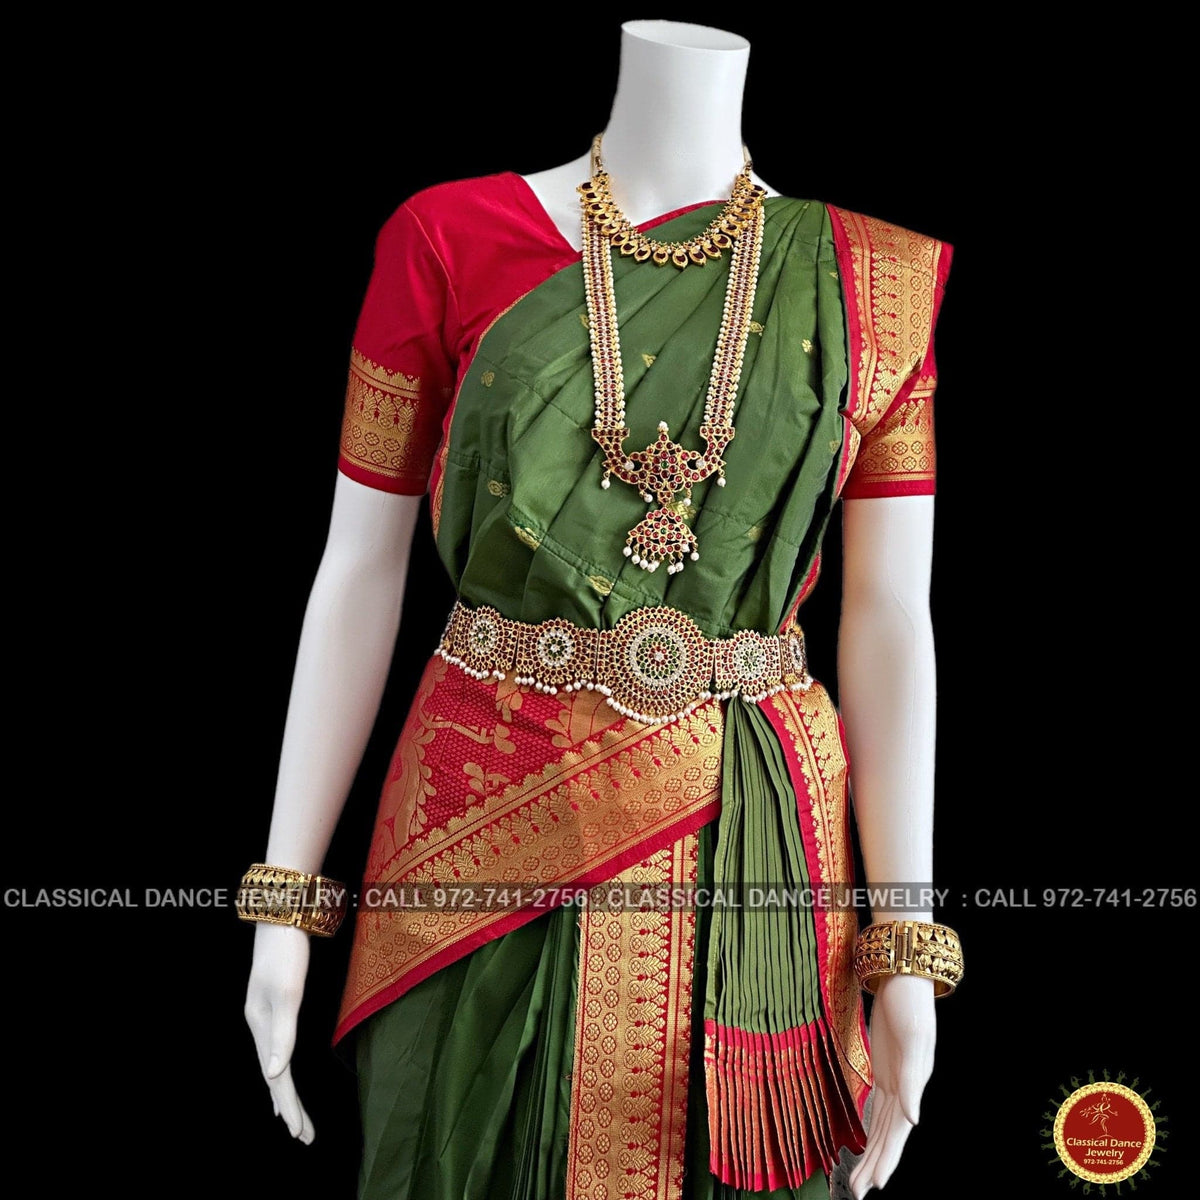 Red Silk Embroidered Waist Belt With Ghungroo / Belts for Saree